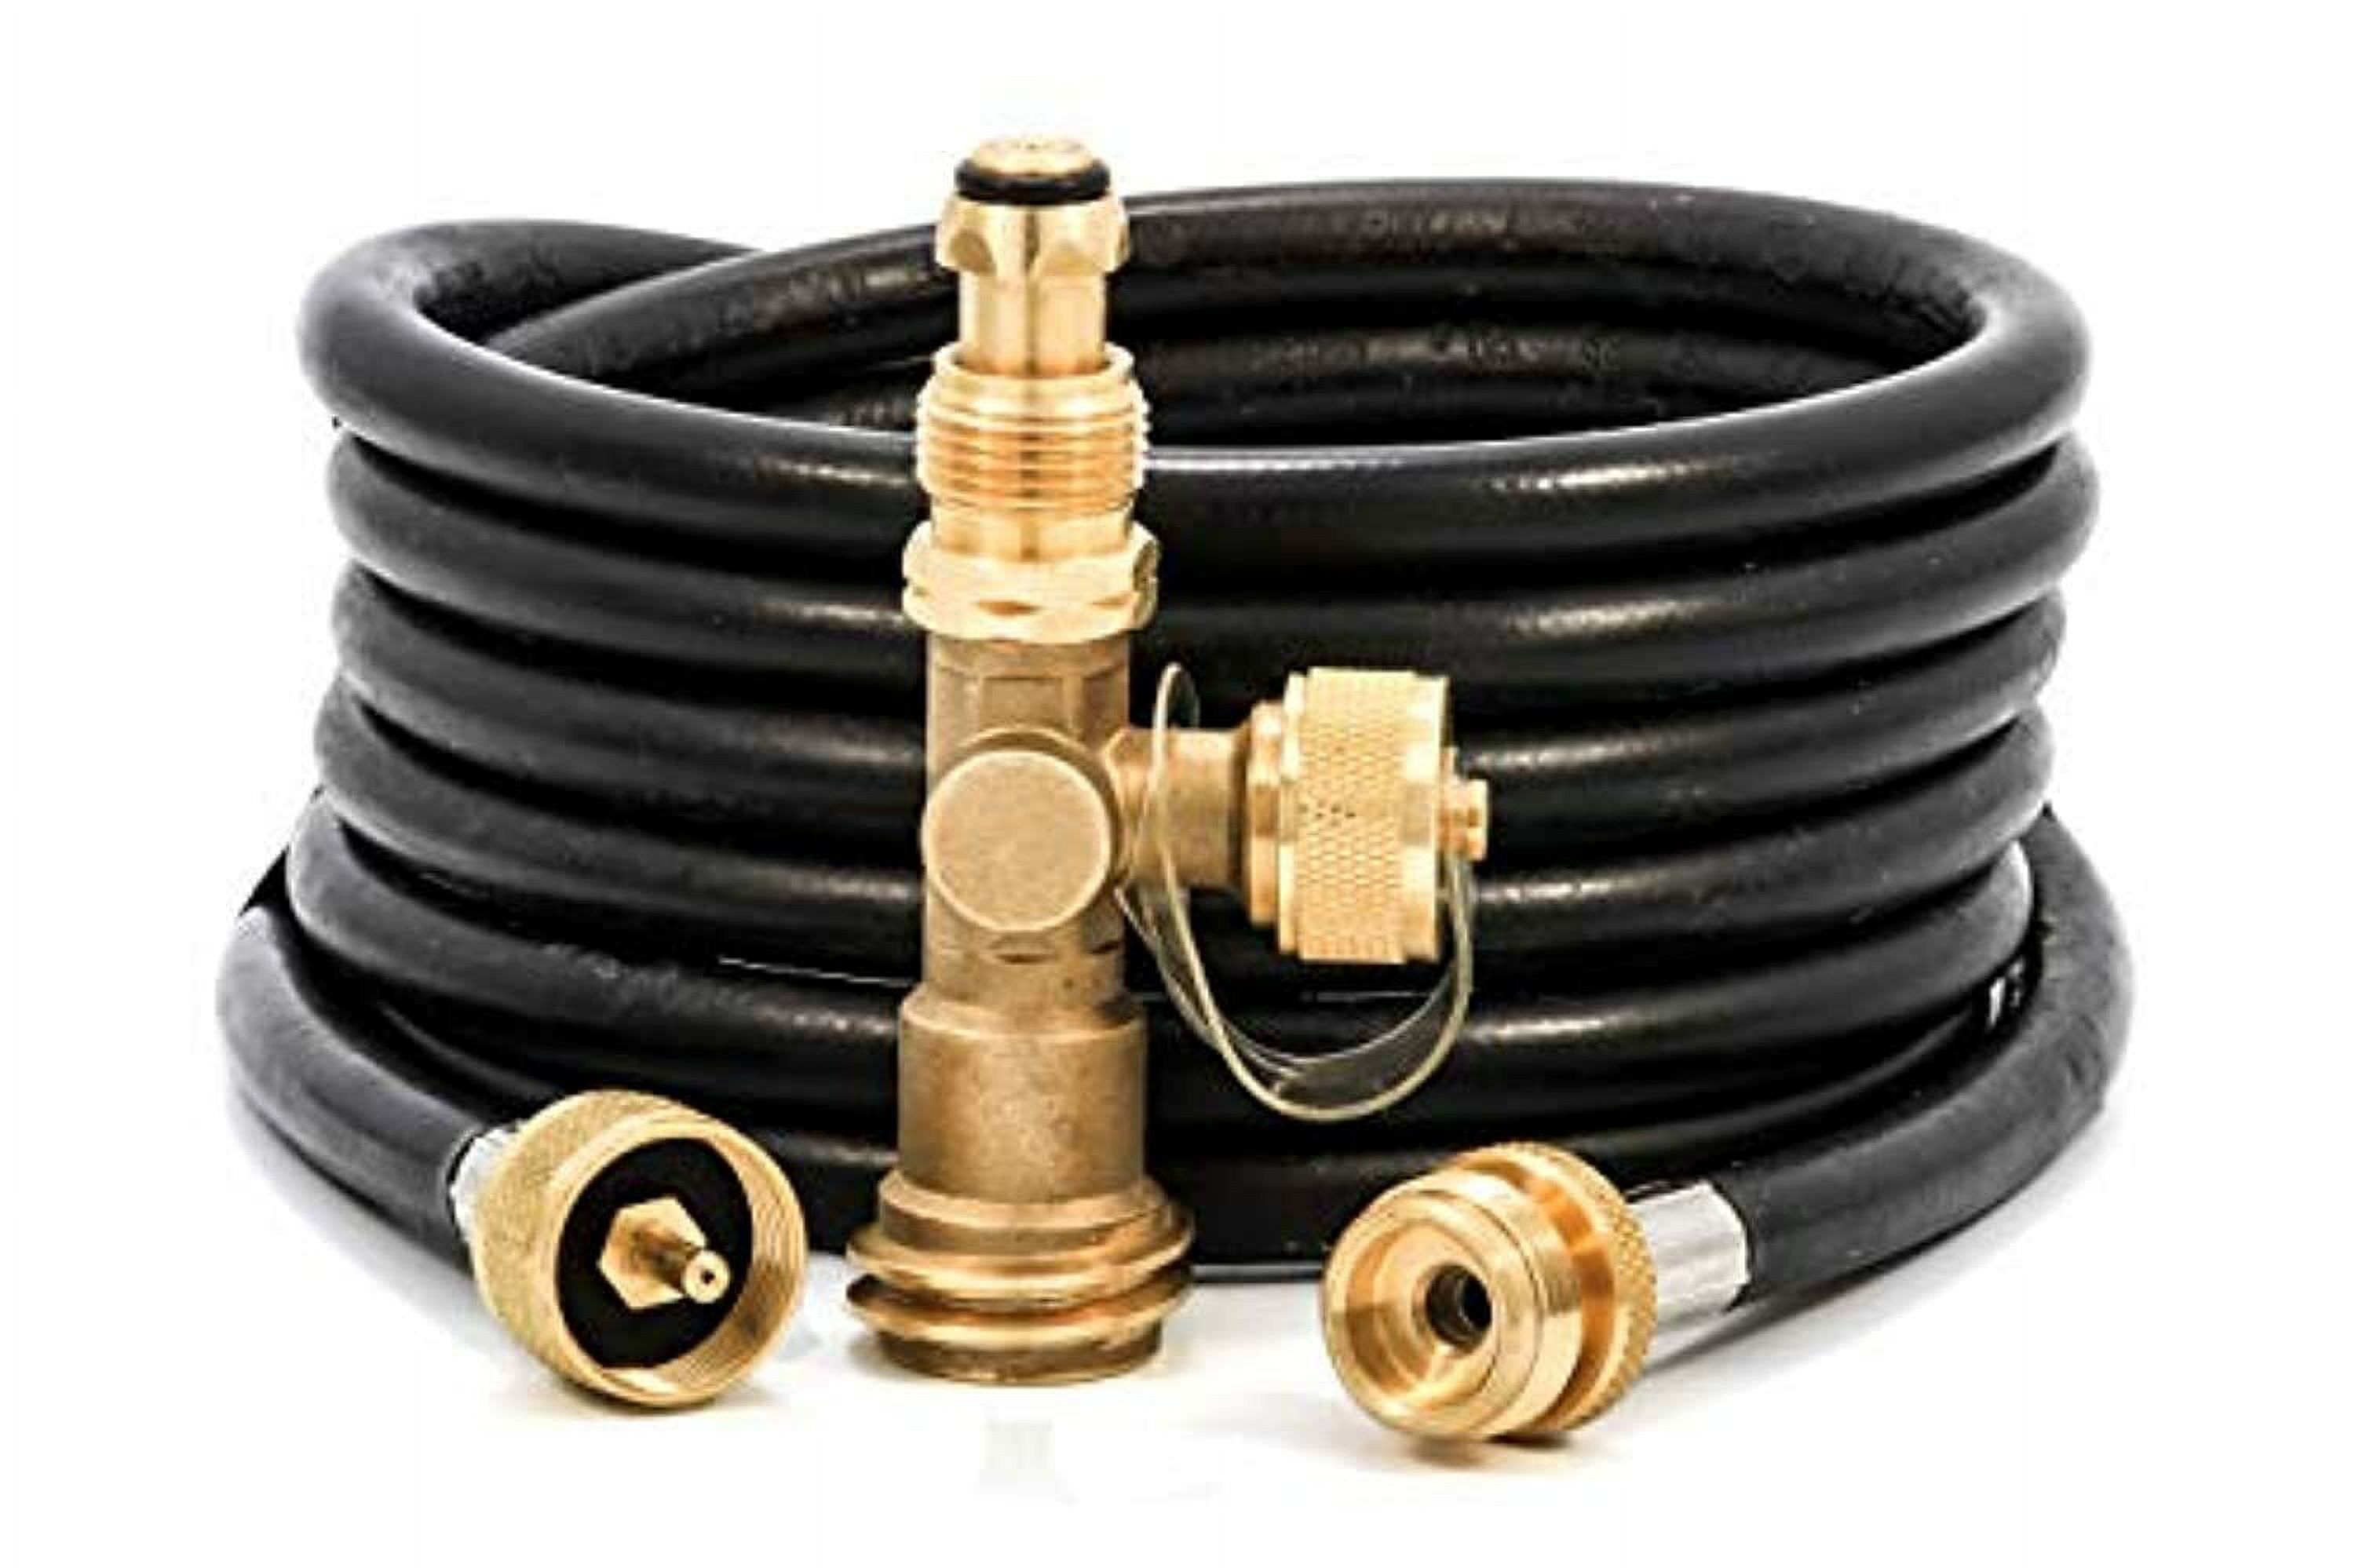 Camco Camper/RV Propane 3-Port Brass Tee with 12-Ft Propane Hose | Includes a Female POL, Excess Flow Soft Nose POL & 1"-20 Male Throwaway Cylinder Thread (59103) - image 3 of 10